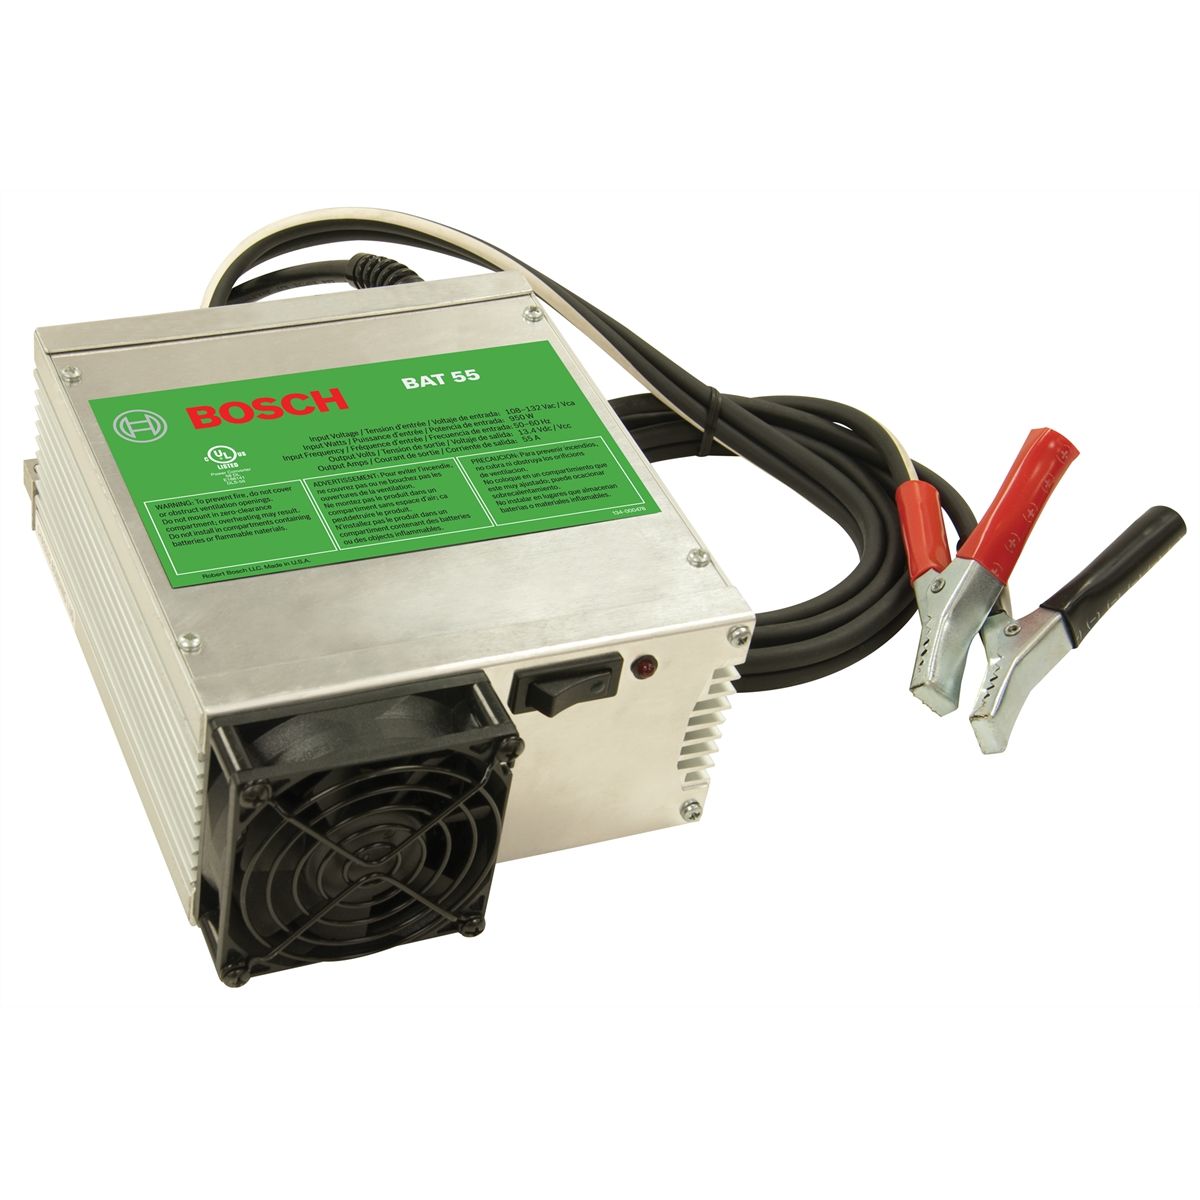 BAT55 Stable Power Supply and Battery Charger